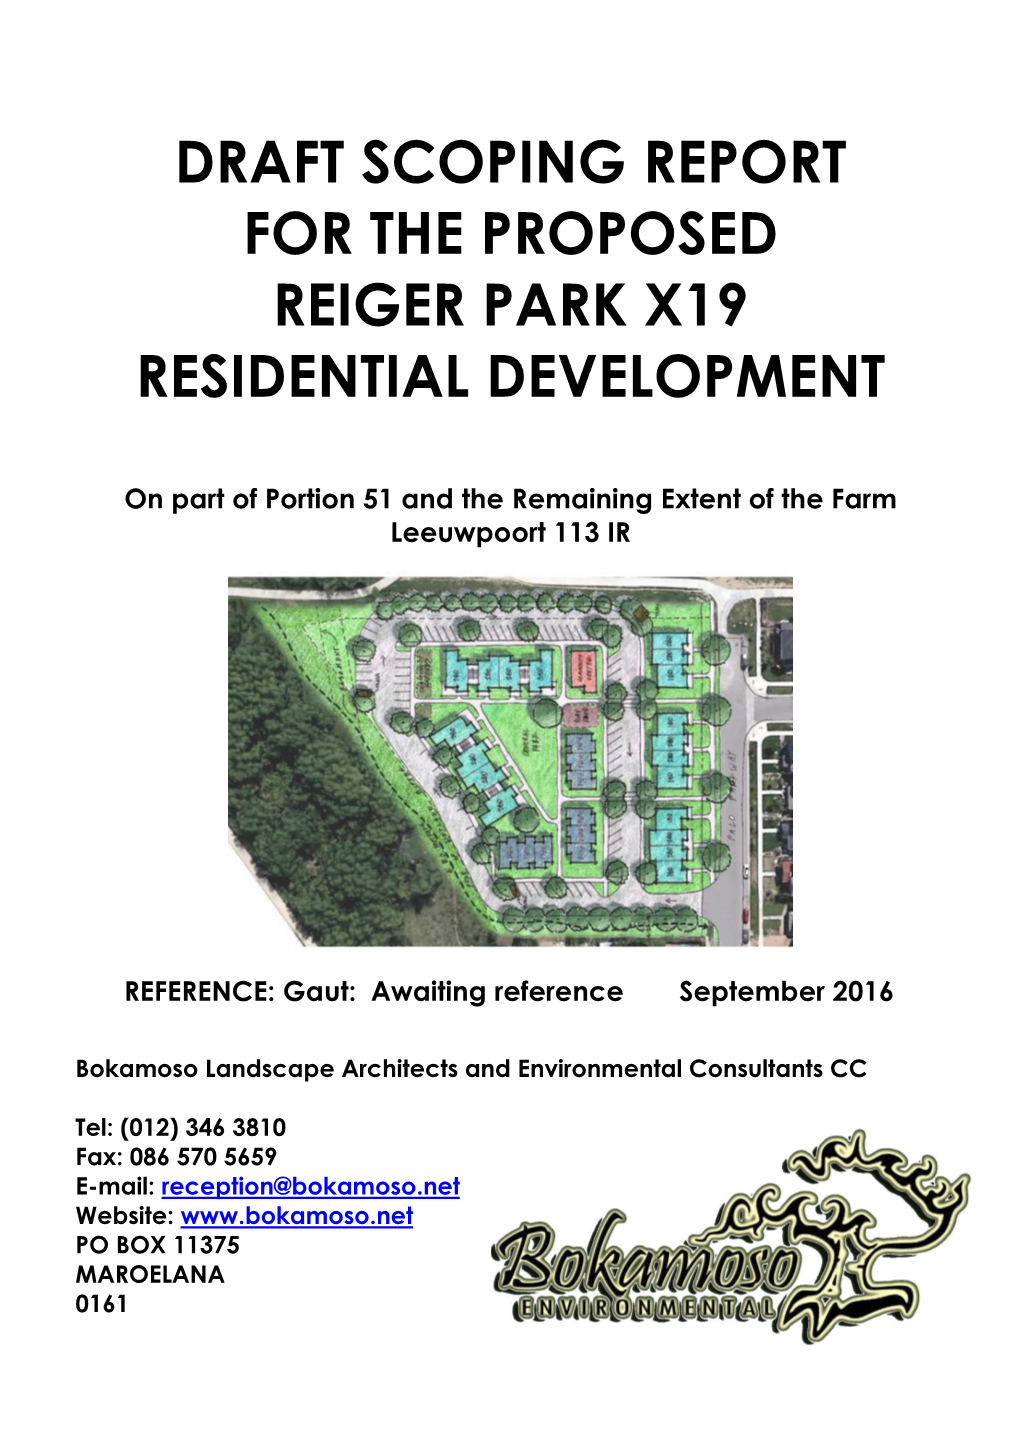 Draft Scoping Report for the Proposed Reiger Park X19 Residential Development